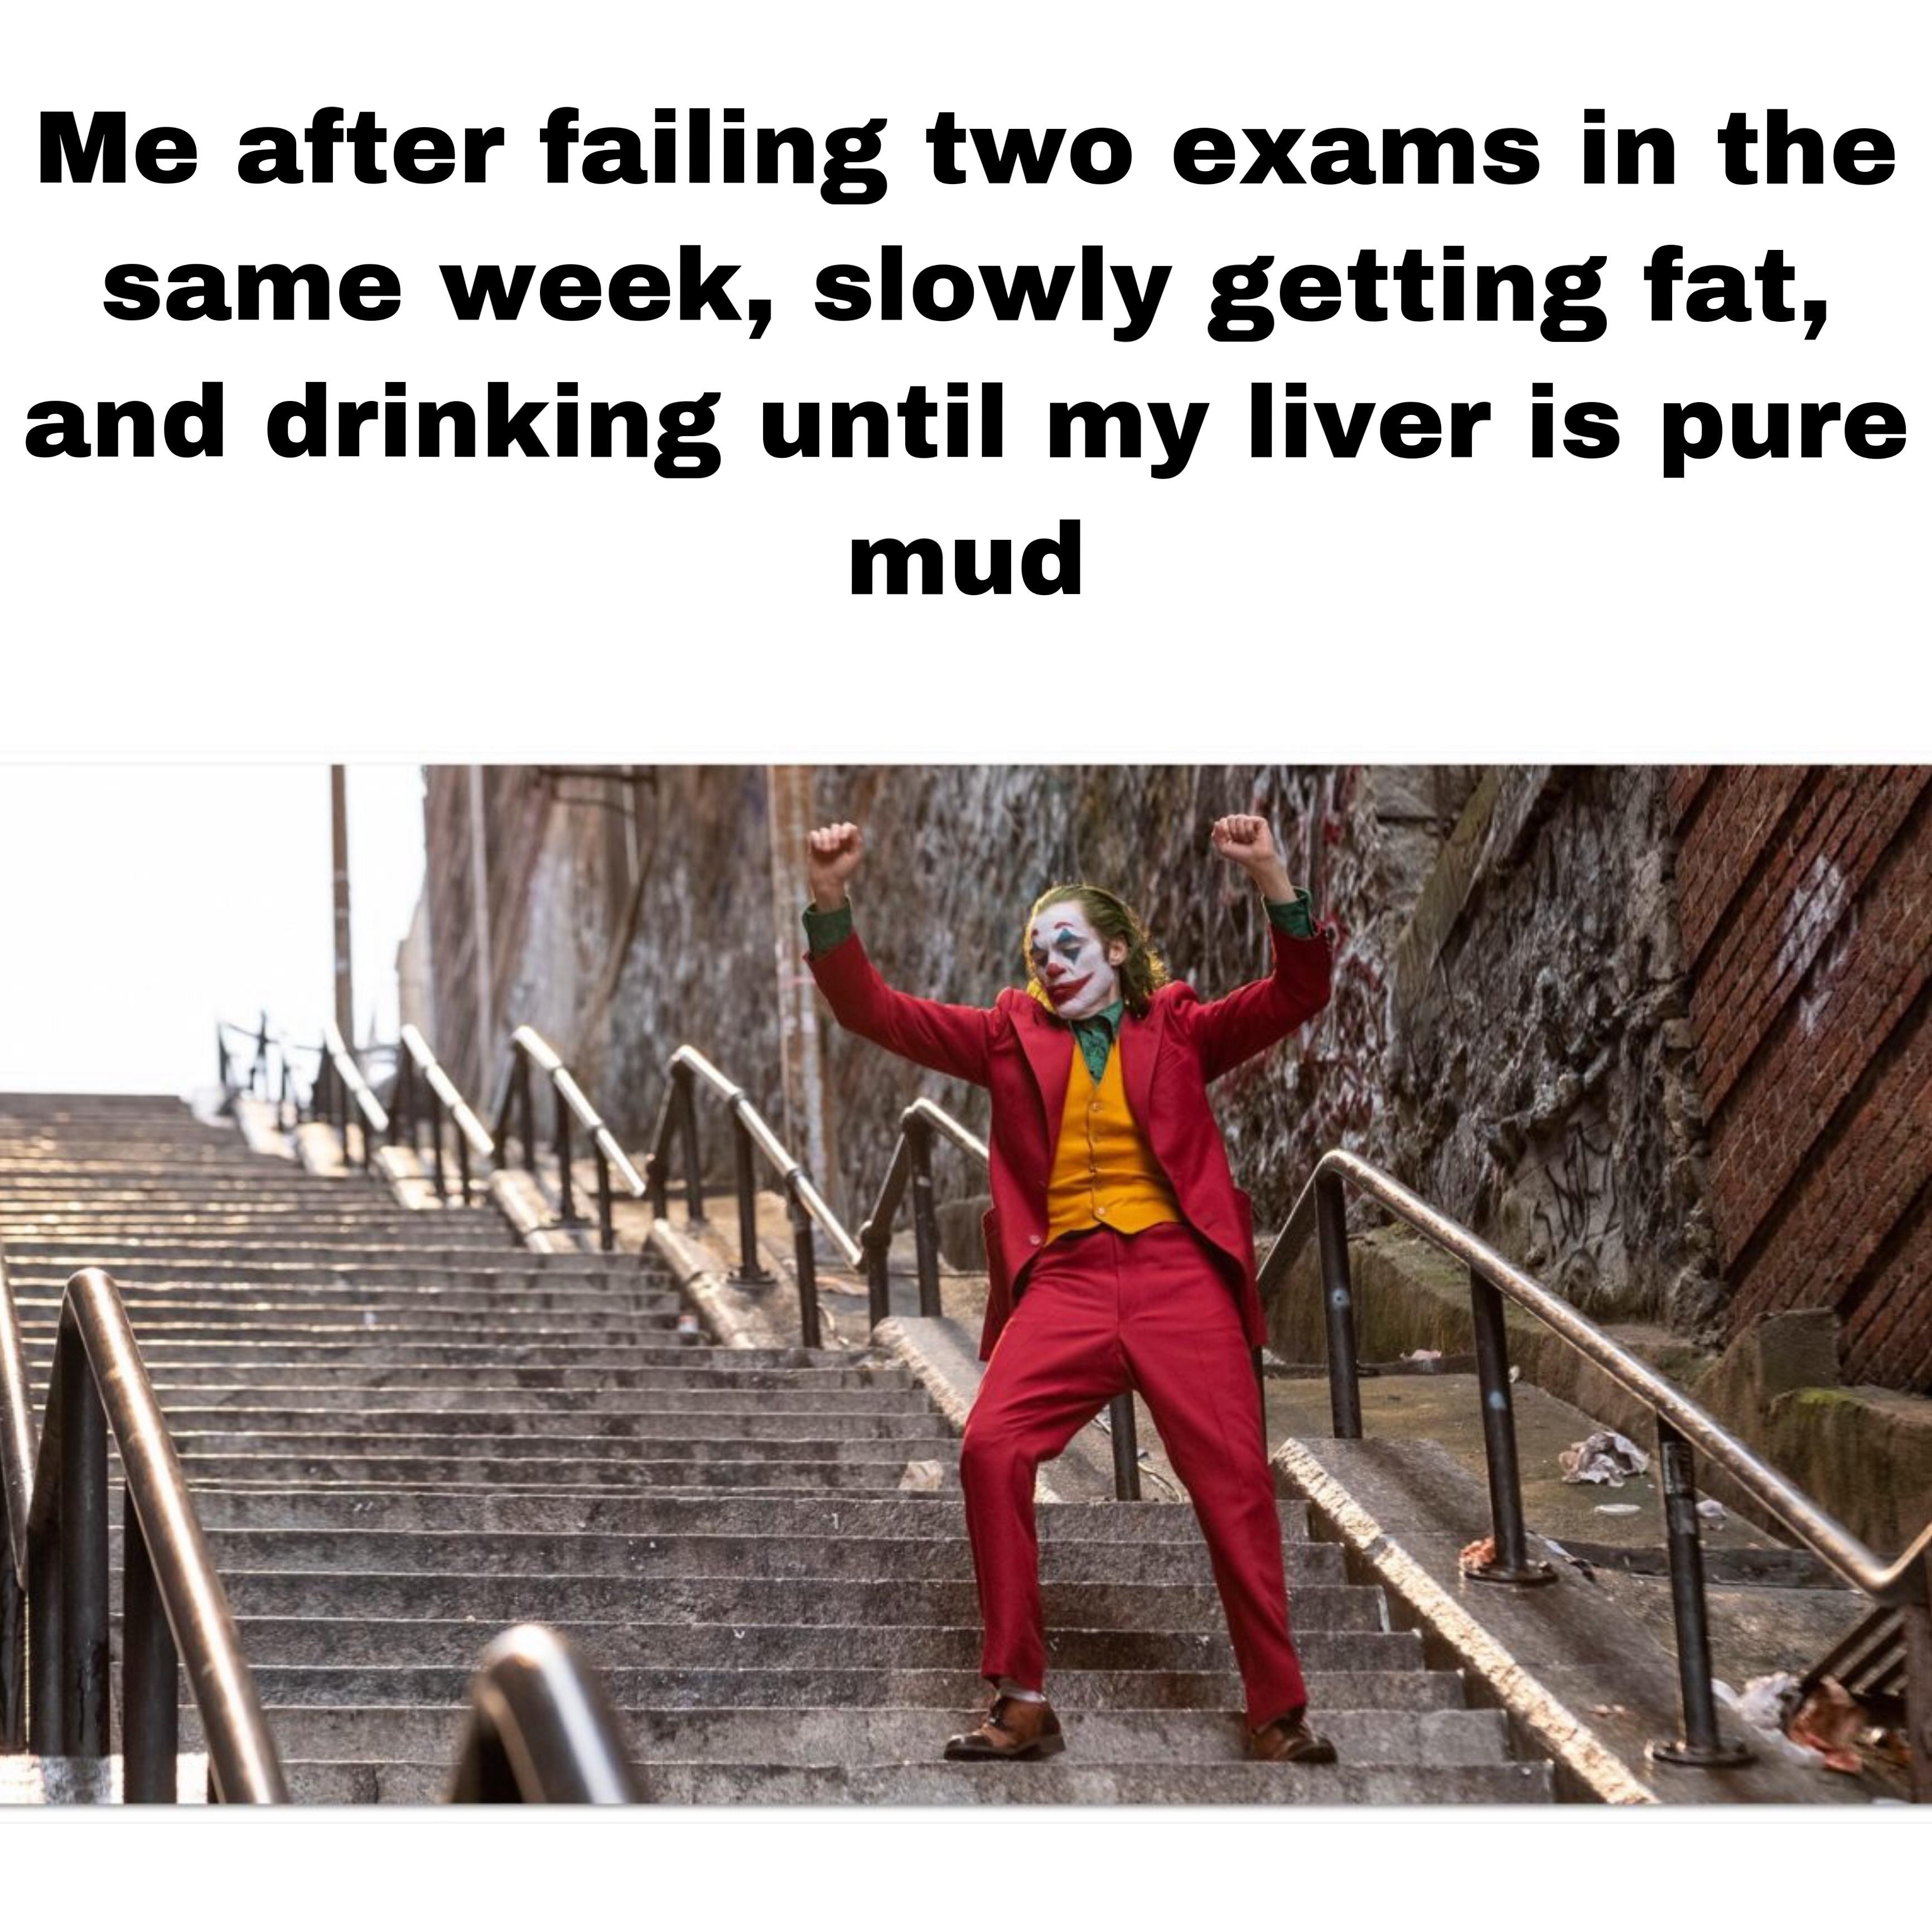 r/collegememes- college dank memes - joker dance meme template - Me after failing two exams in the same week, slowly getting fat, and drinking until my liver is pure mud